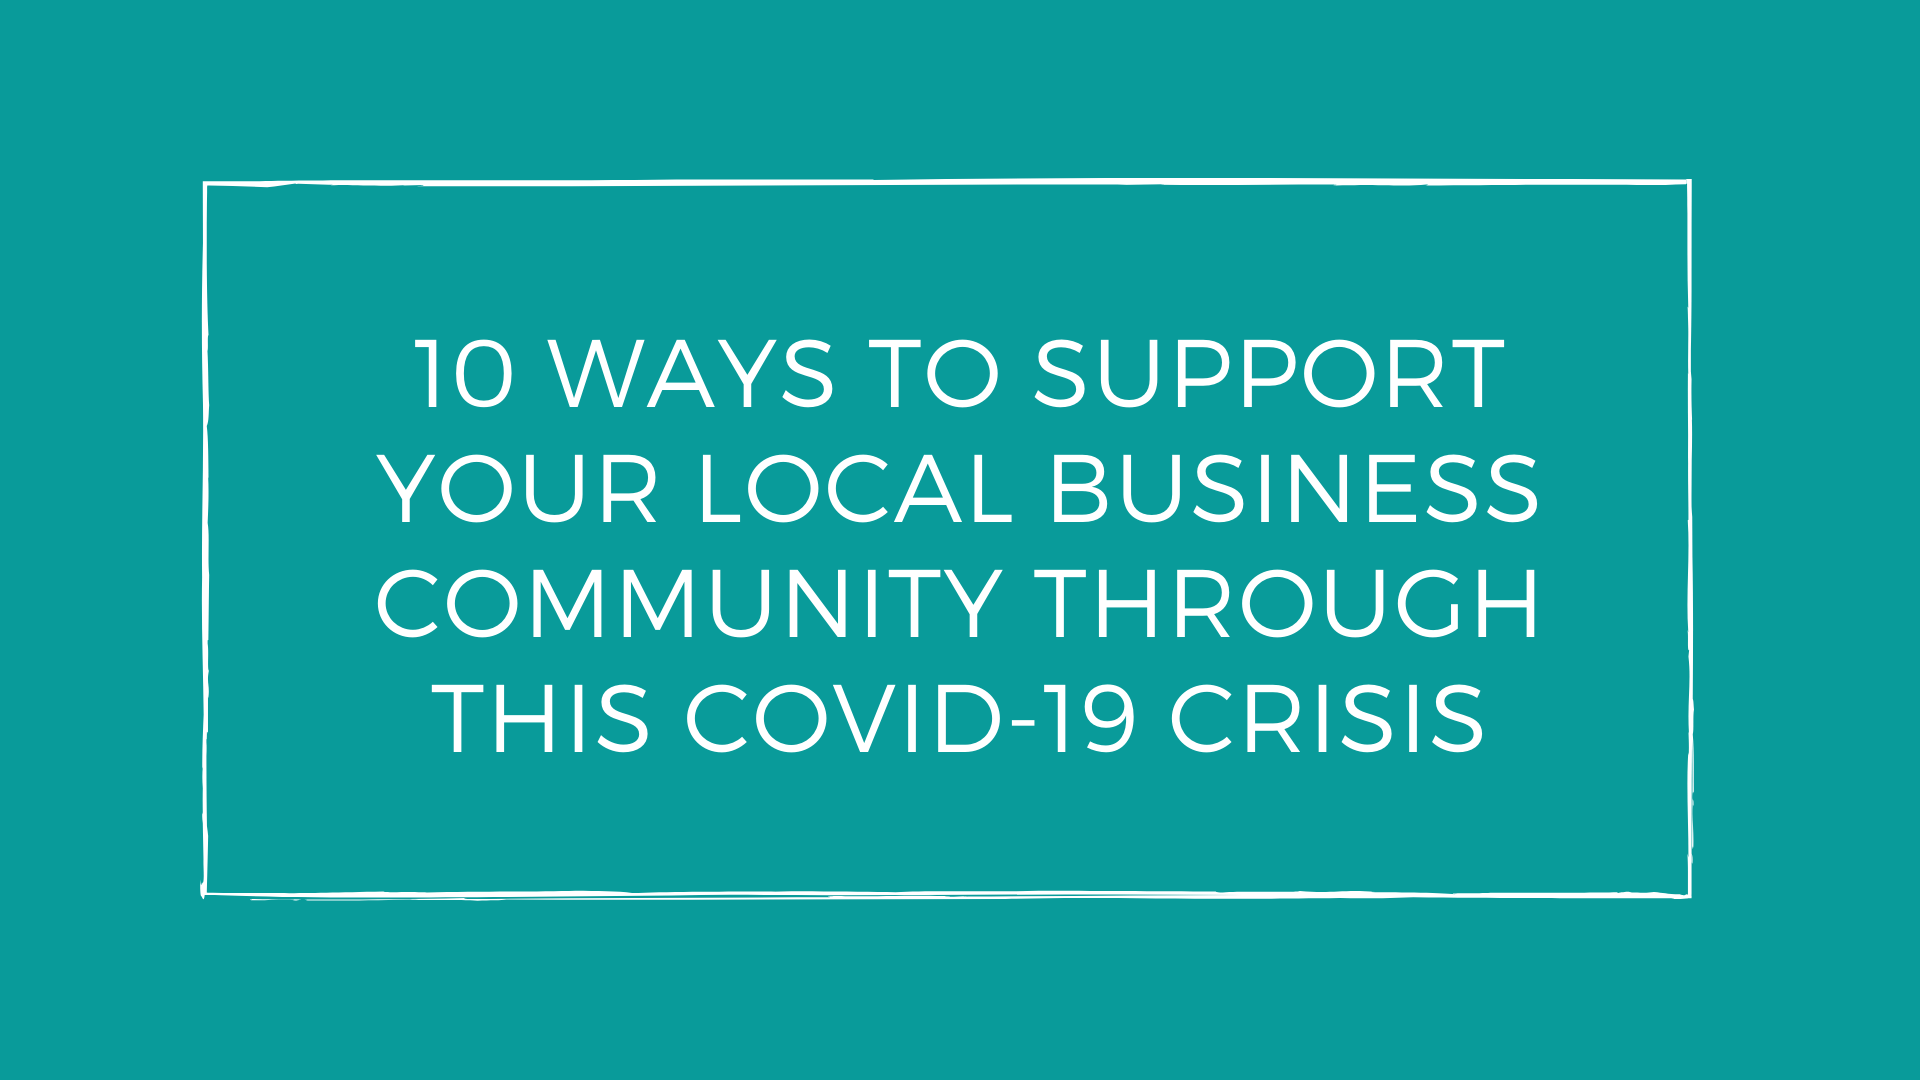 10 Ways to Support Your Local Business Community Through this COVID-19 Pandemic | As small businesses continue to shut their doors and limit operations